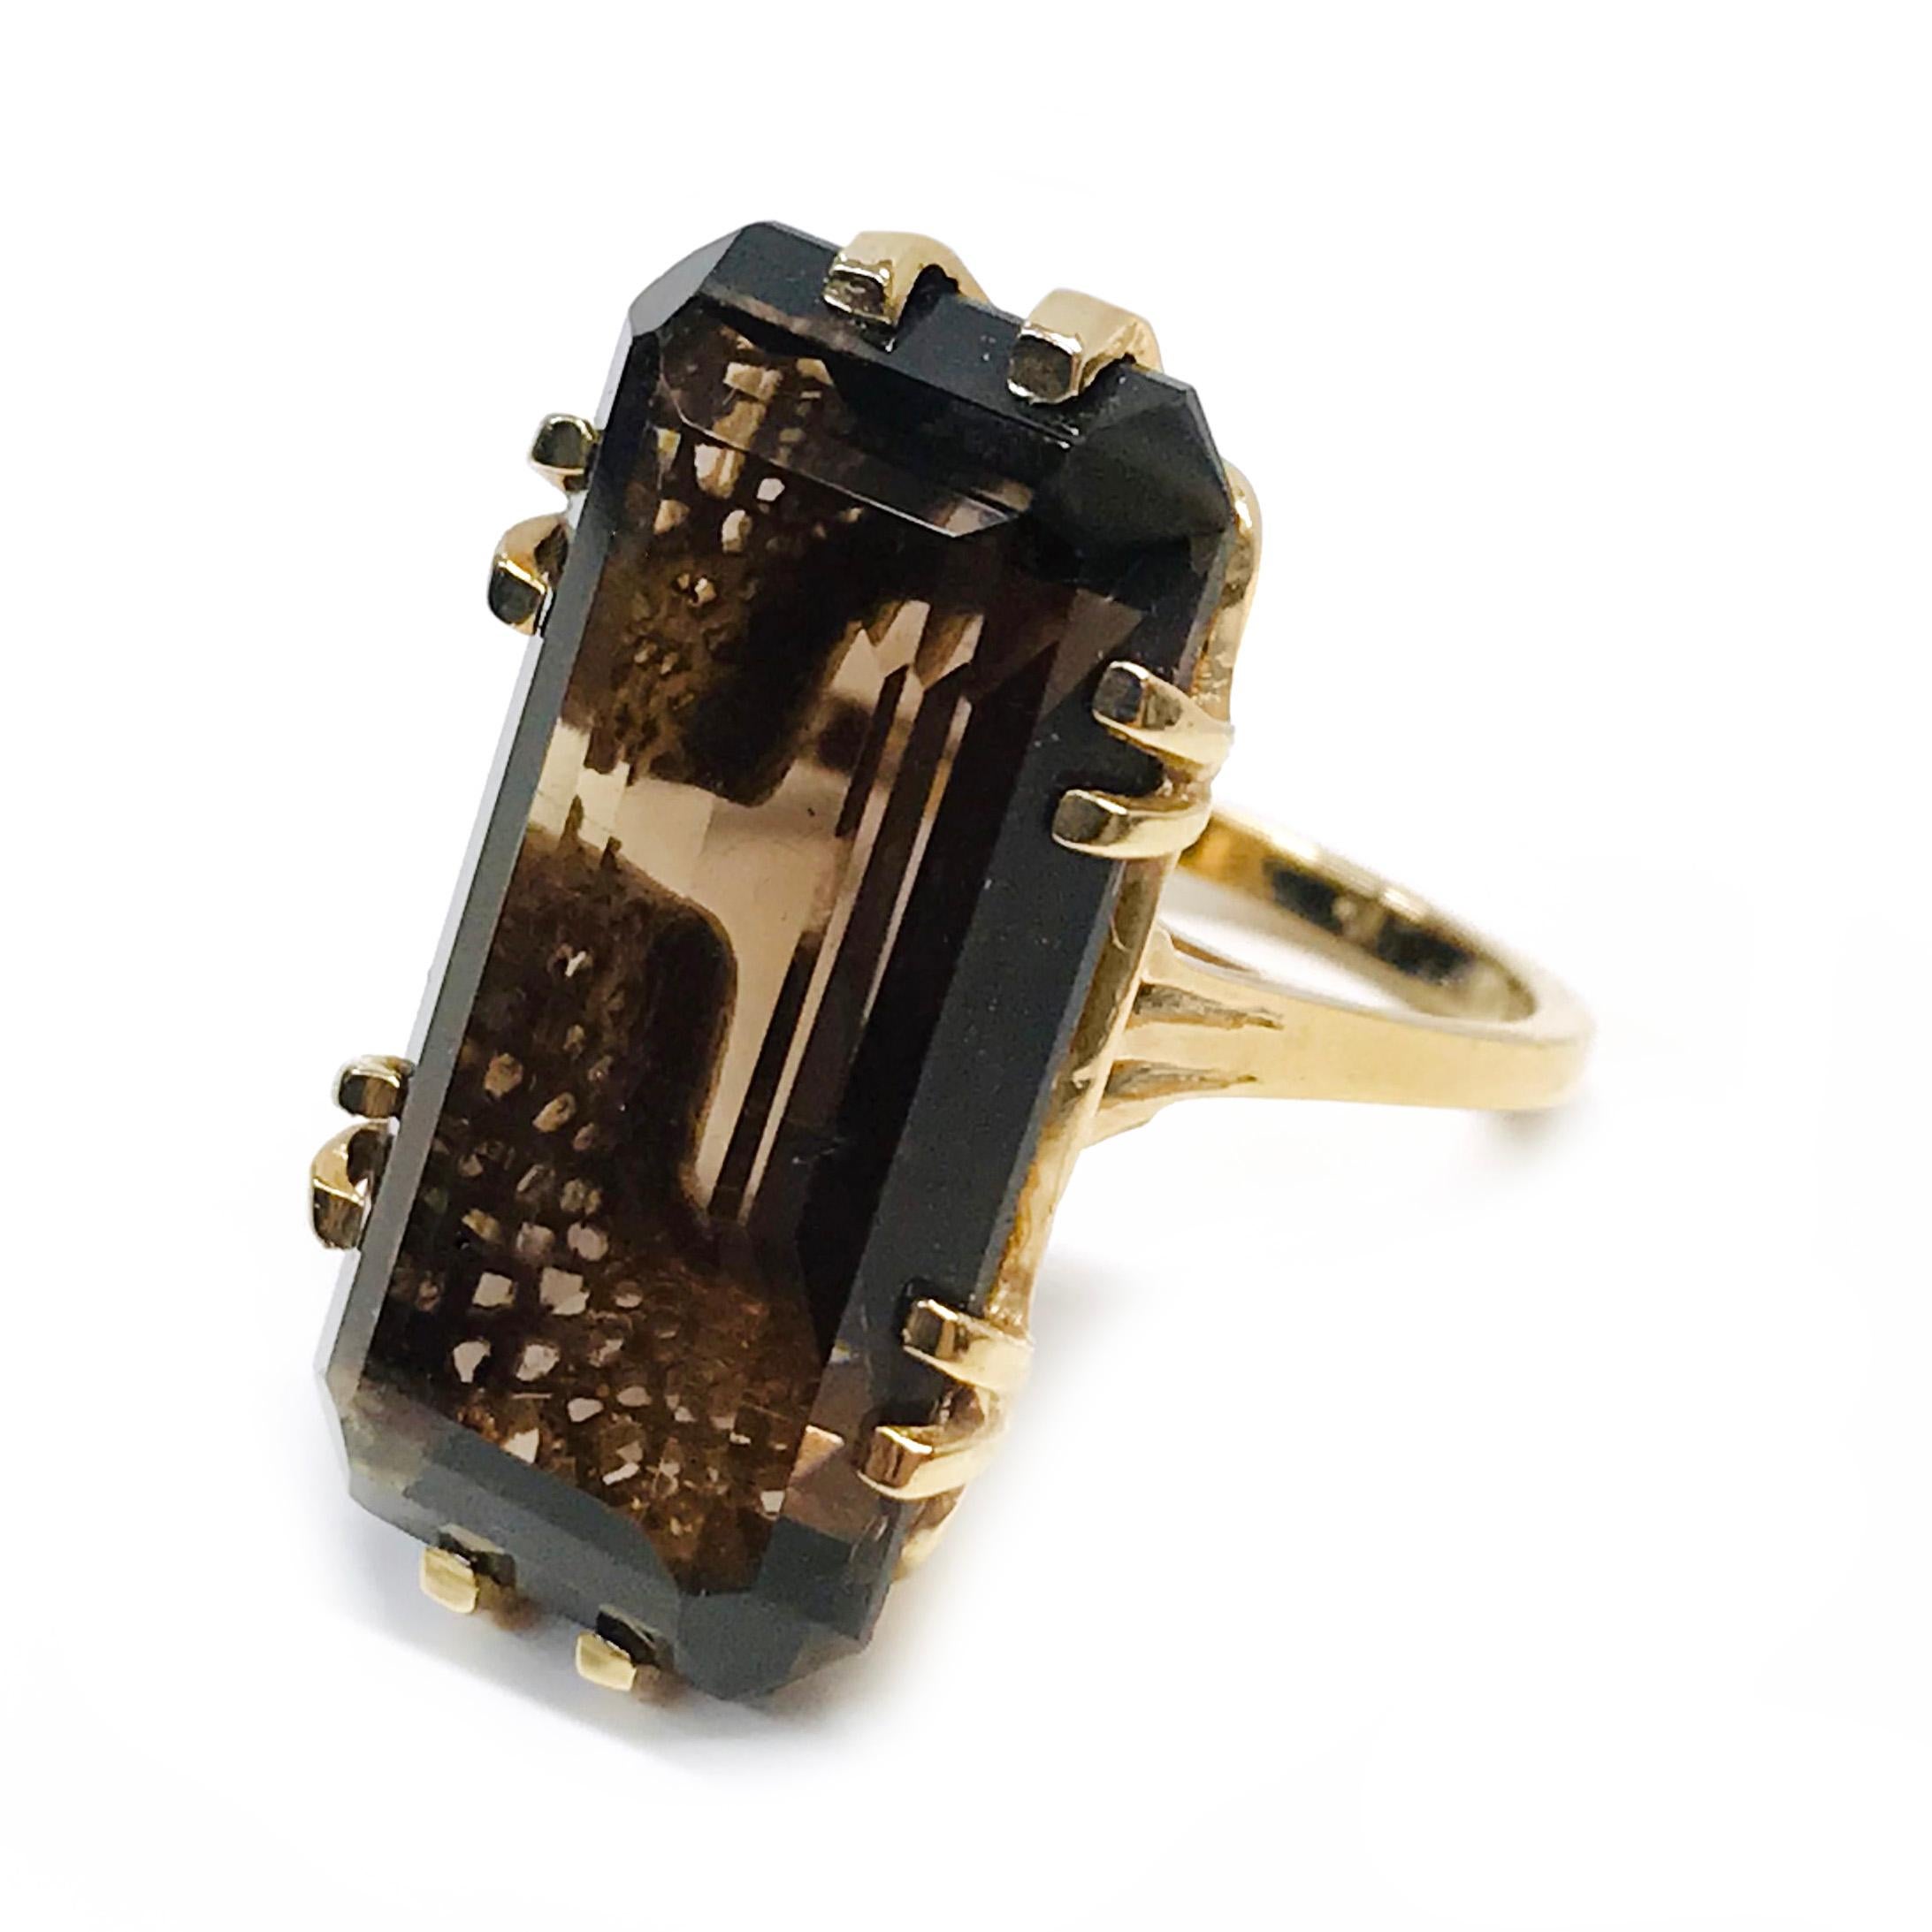 14 Karat Smoky Quartz Ring. The ring features a 24 x 12mm step-cut Smoky Quartz. The ring has a mesh looking basket and six dual prongs. Stamped on the inside of the band is TB 14K. The ring size is 6 and has a gold weight of 7.7 grams. 